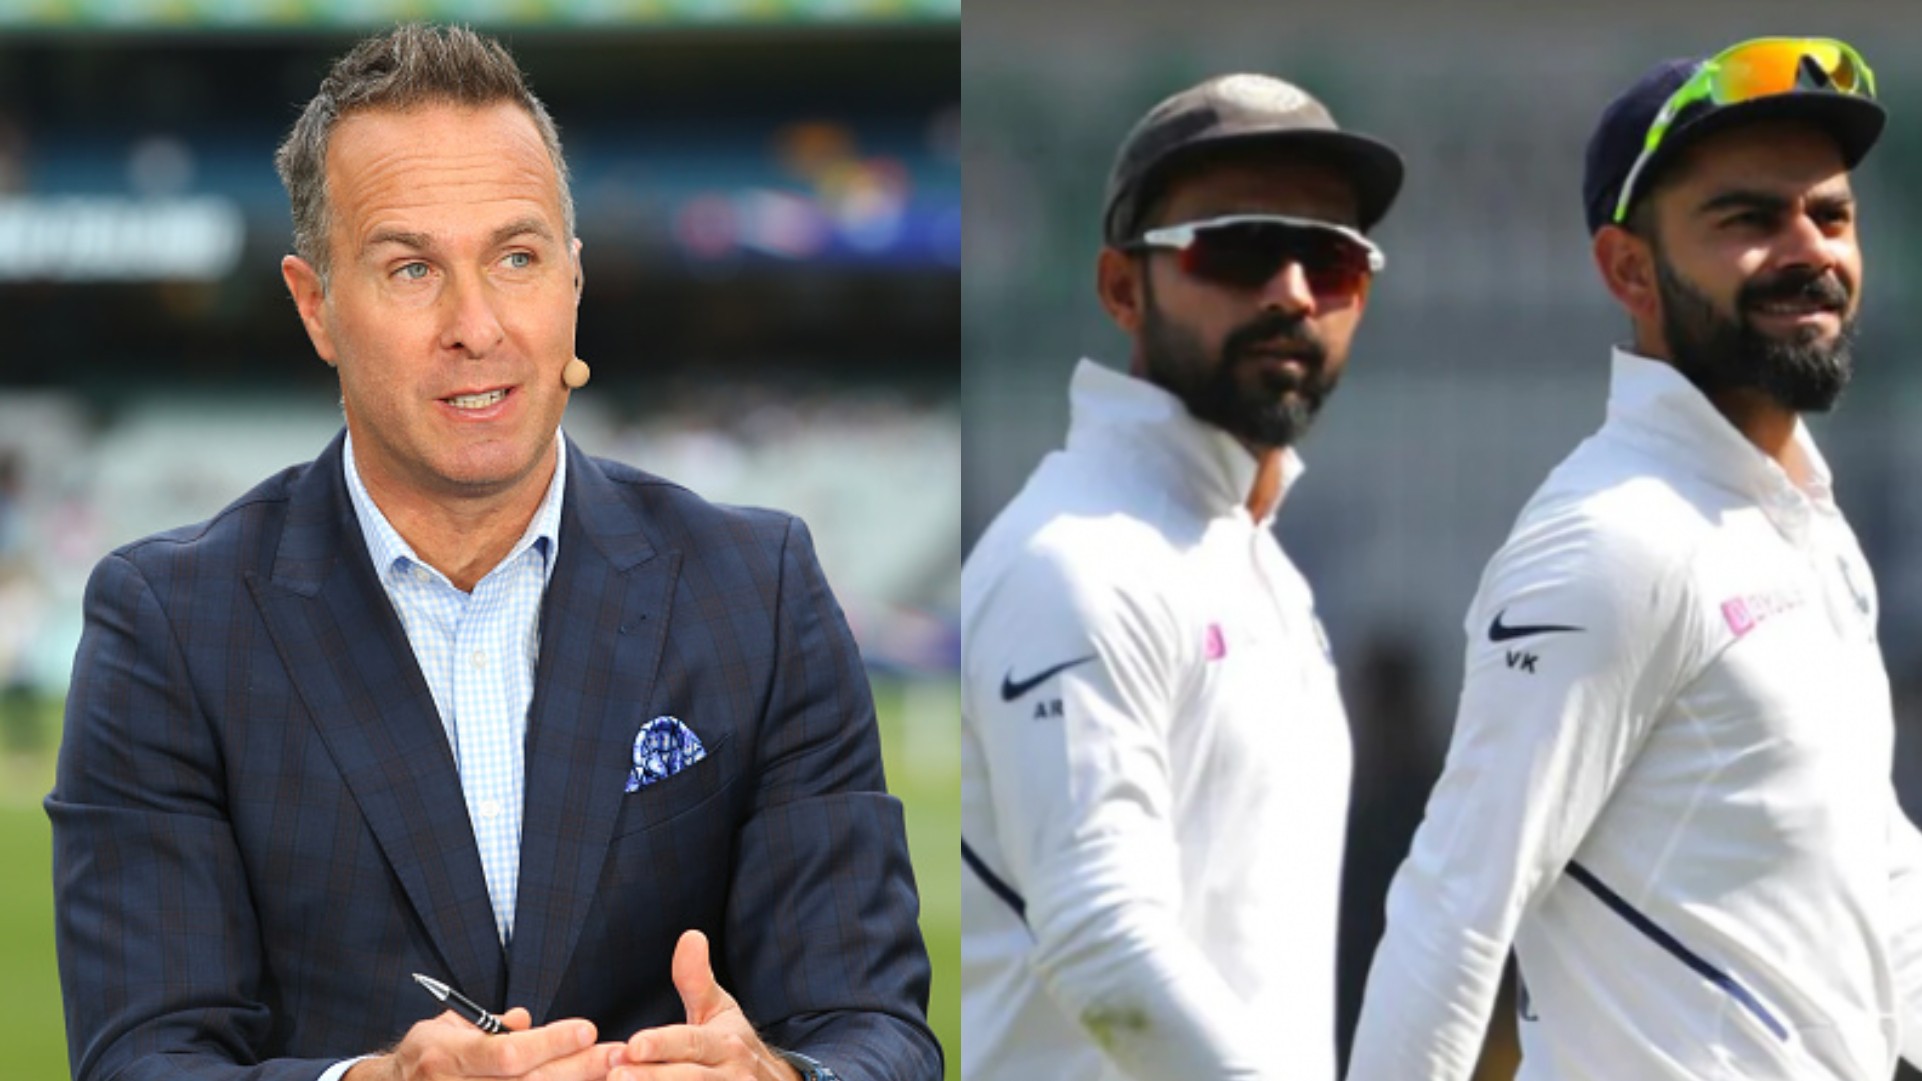 AUS v IND 2020-21: Michael Vaughan suggests BCCI to consider Ajinkya Rahane as permanent India Test captain